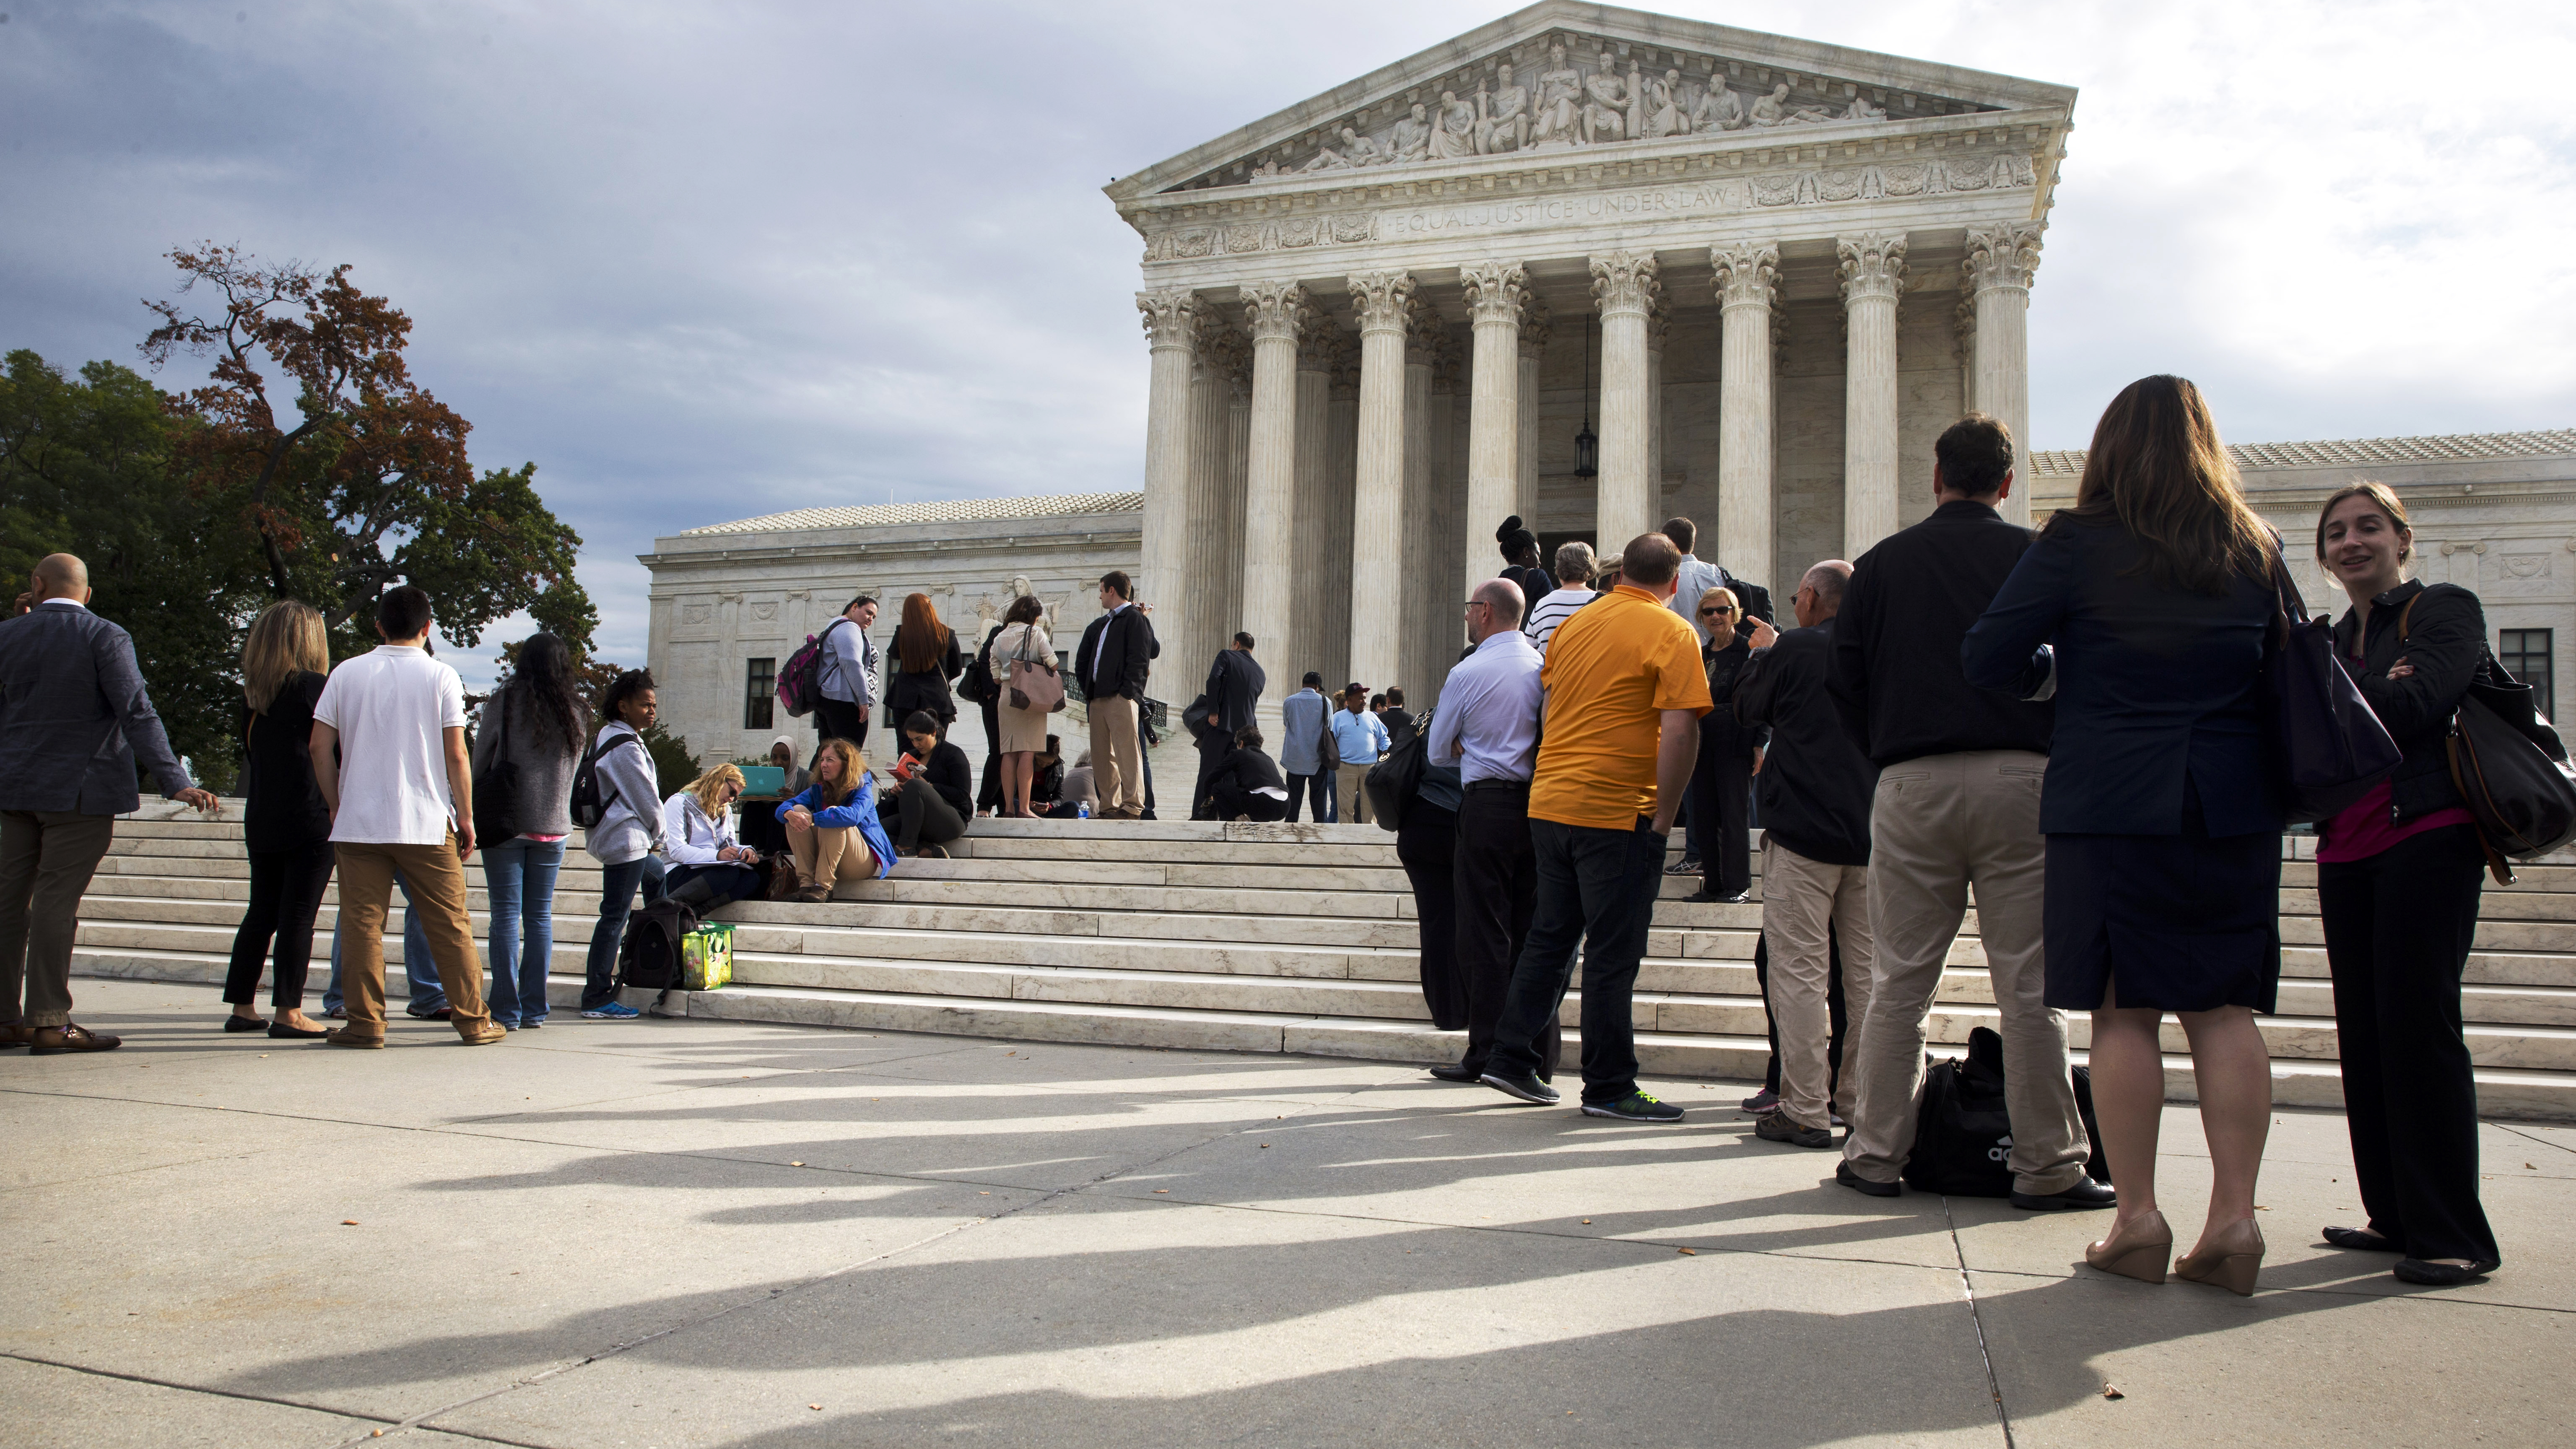 People line up outside the Supreme Court Tuesday ahead of arguments in Montgomery v. Louisiana, a case looking at whether a 2012 high court decision regarding mandatory life sentences should apply retroactively. (Photo by Jacquelyn Martin/AP)